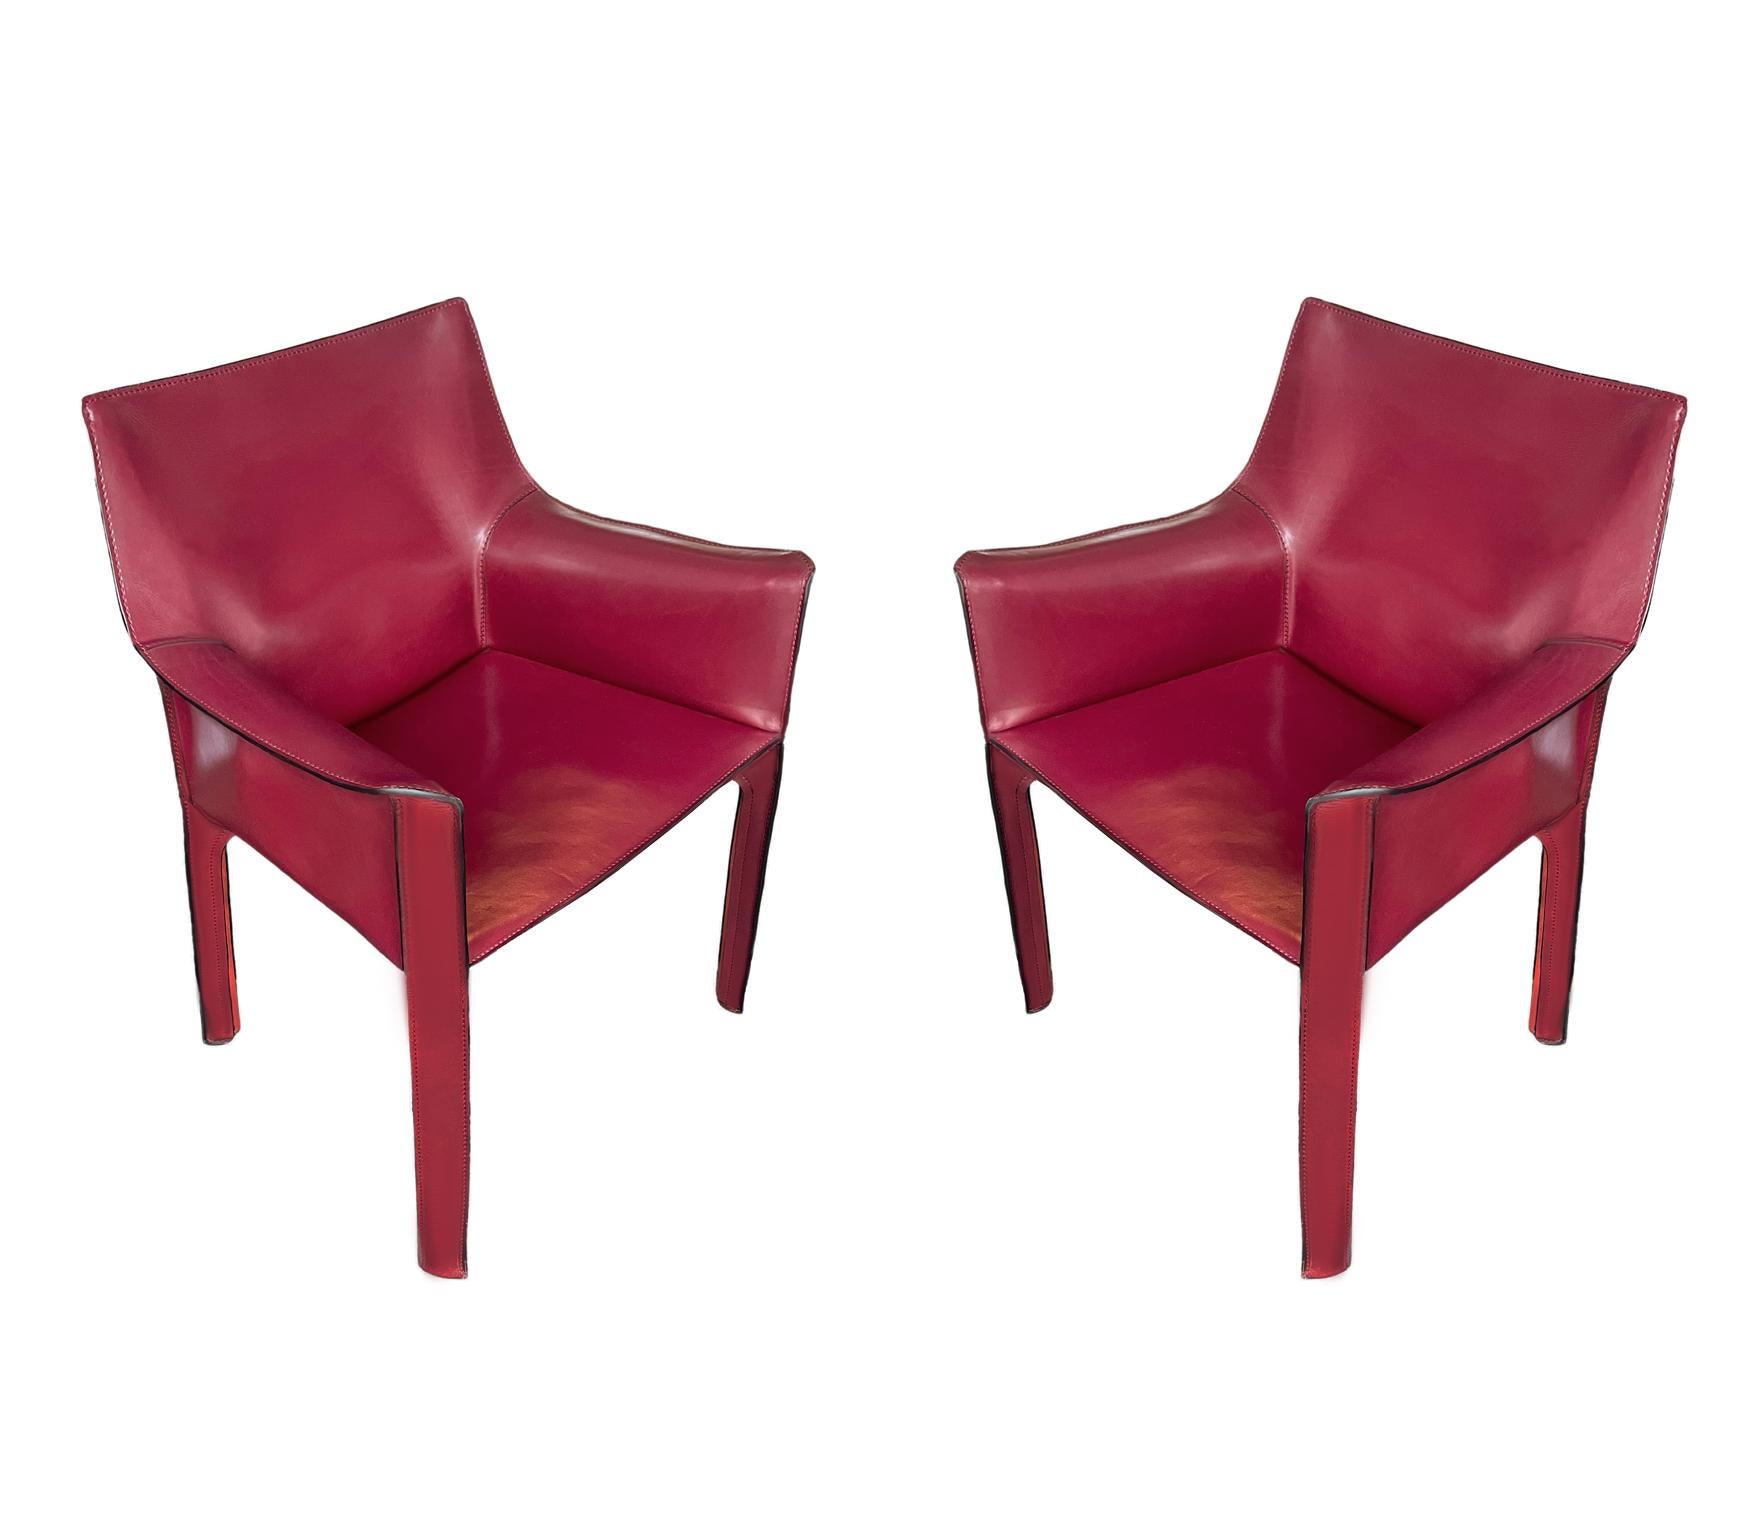 Set of Four Italian Cab Armchairs or Dining Chairs by Mario Bellini Red Leather 1